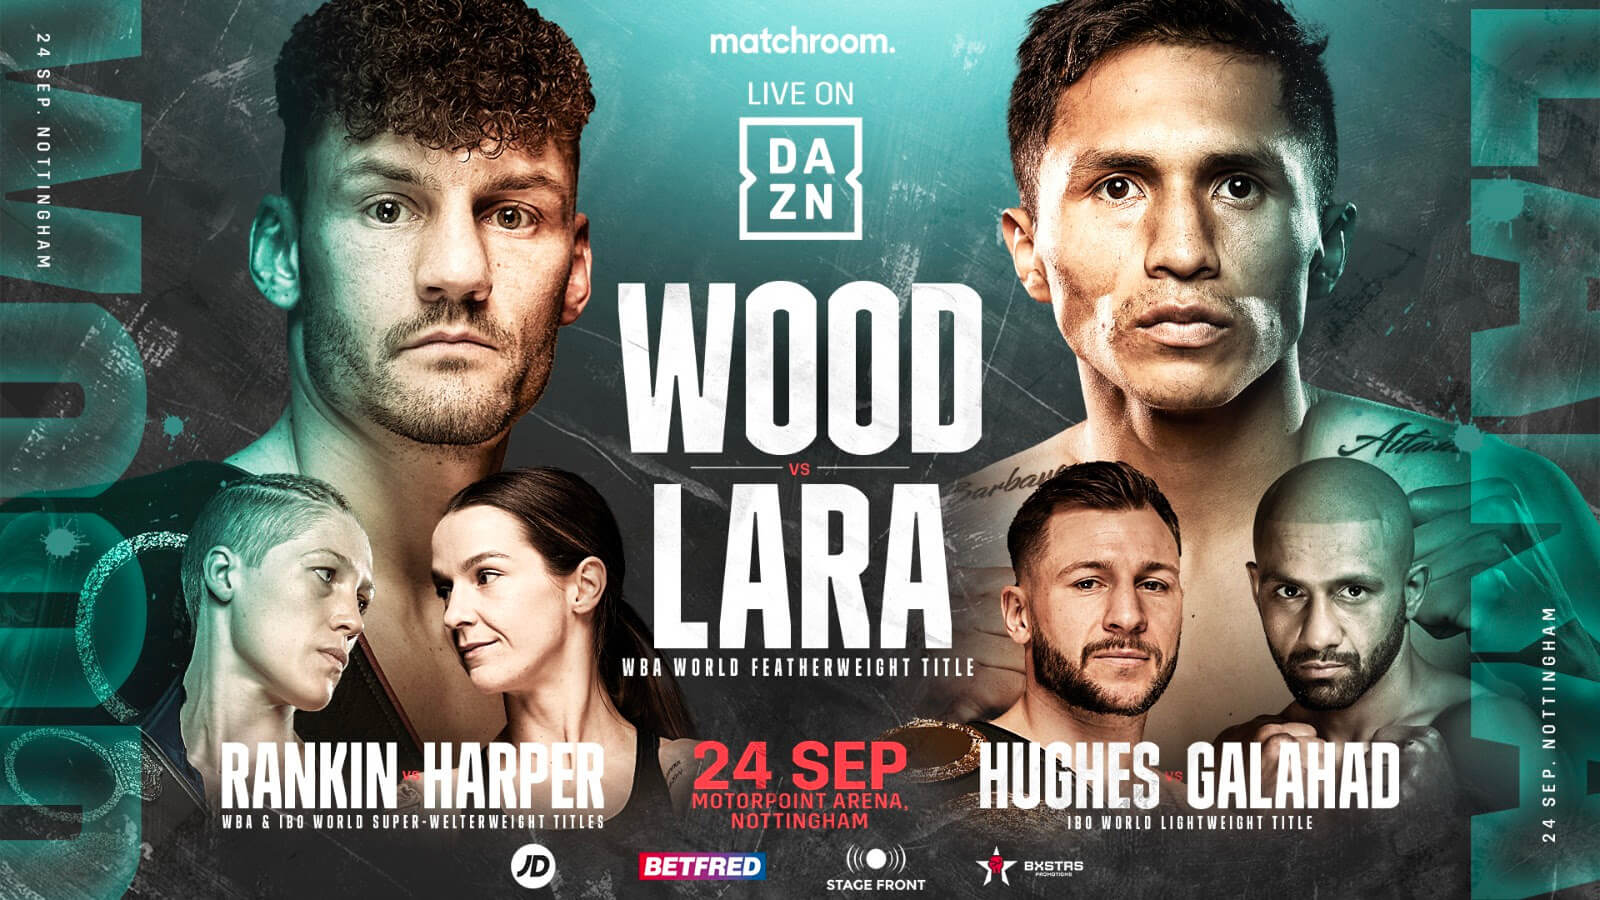 ALL-OUT WAR: WOOD DEFENDS FEATHERWEIGHT CROWN AGAINST LARA ON SEPTEMBER 24